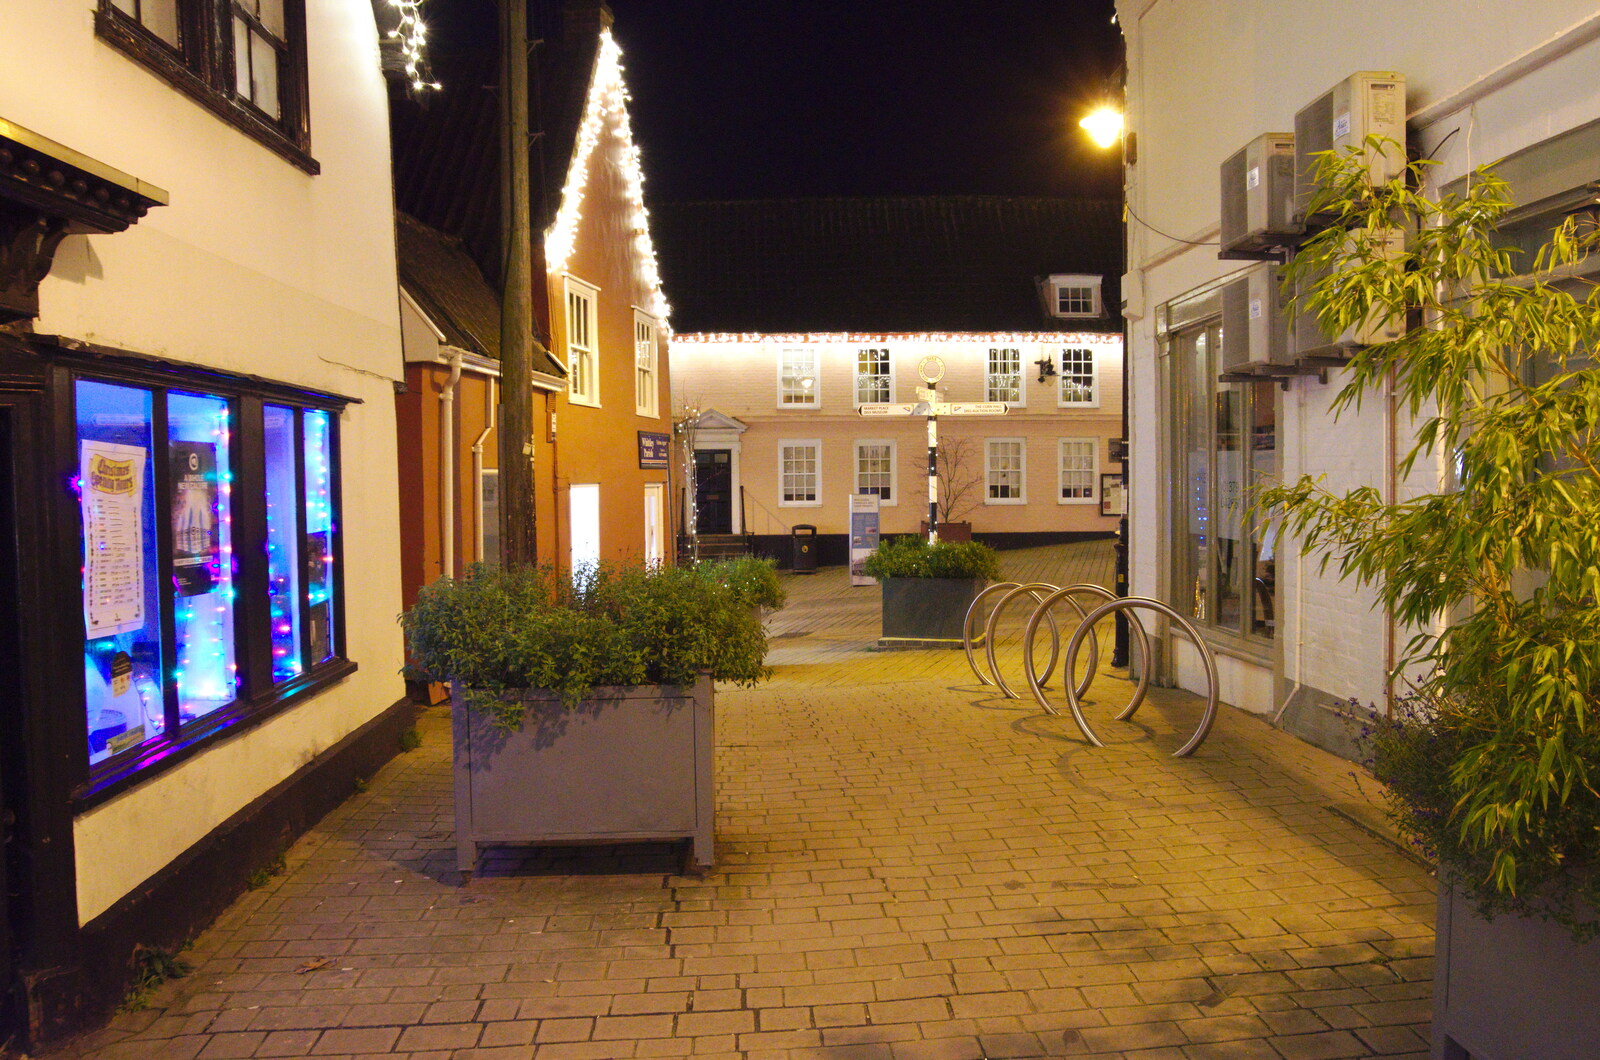 The cut, looking at the Town Council offices from Diss Panto and the Christmas Lights, Diss, Norfolk - 27th December 2019